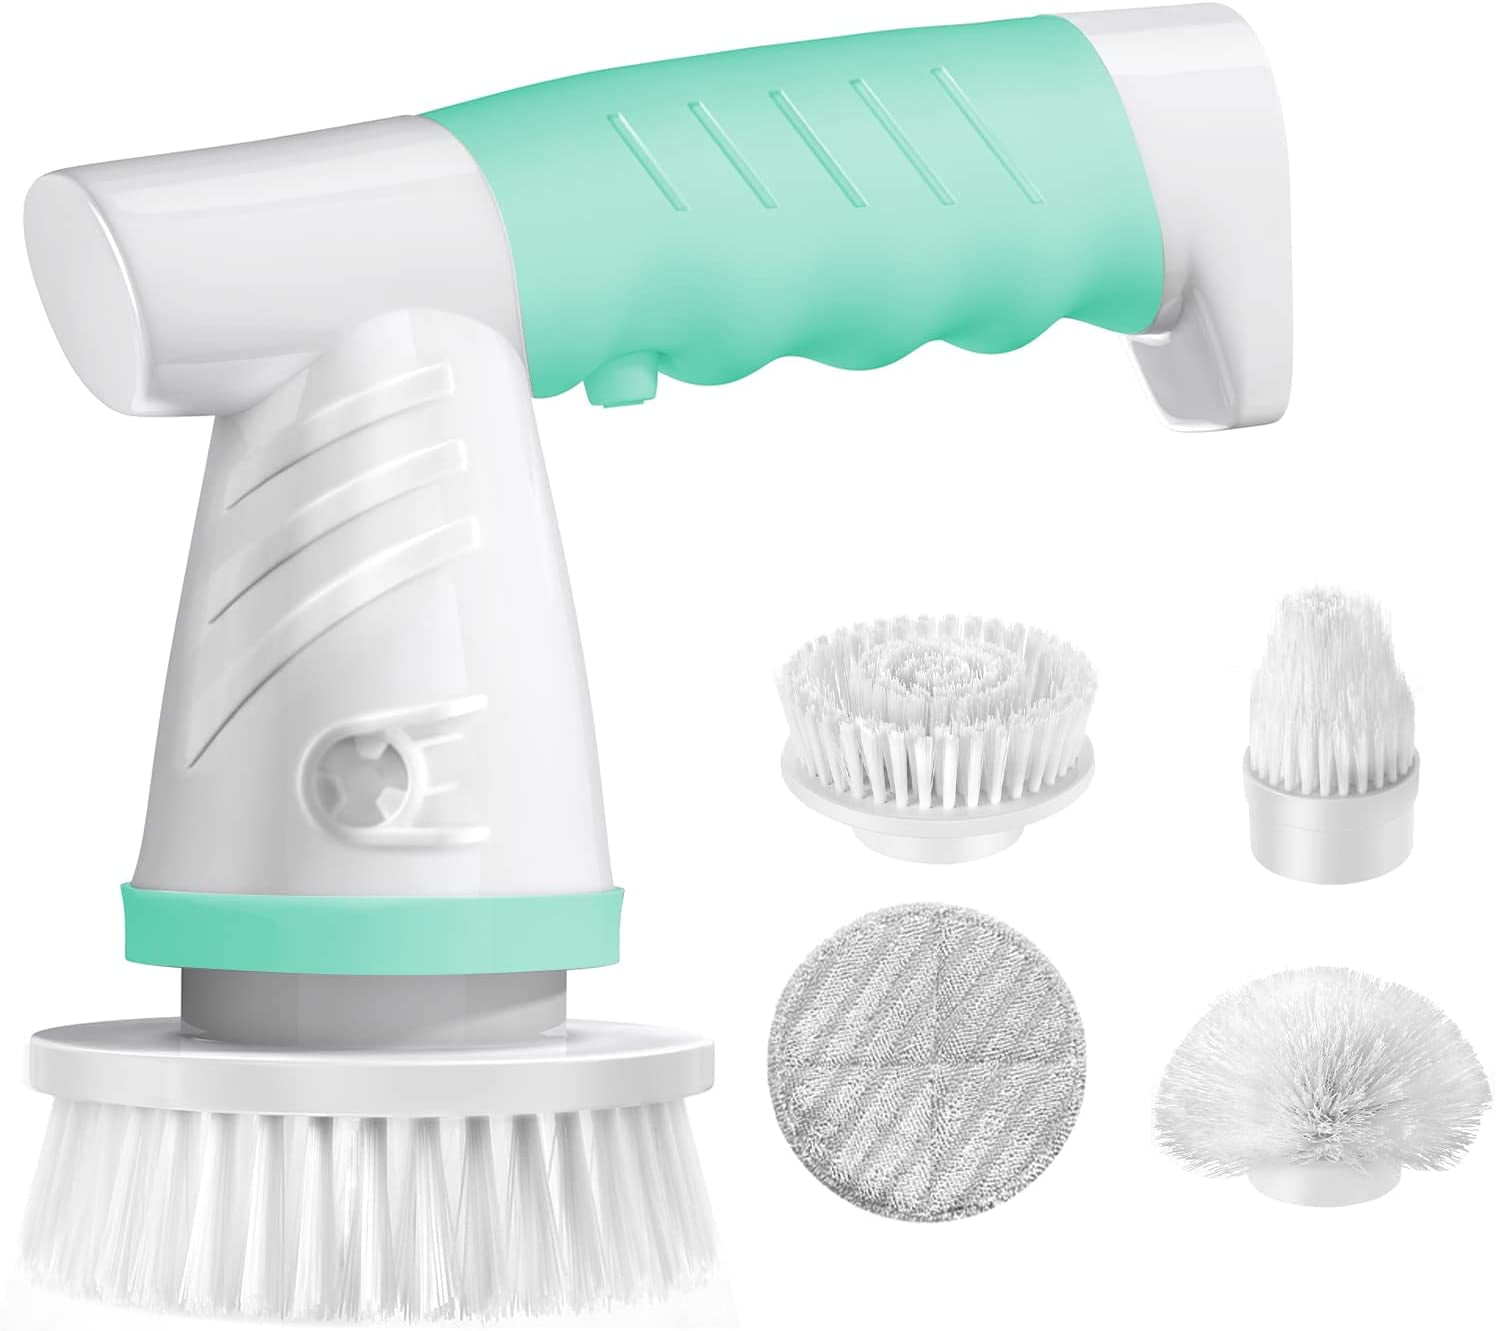 GEERLEPOL Electric Spin Scrubber, Cordless Electric Cleaning Brush Handheld Shower Scrubber for Cleaning Tub, Tile, Floor, Sink, Window, Cordless with